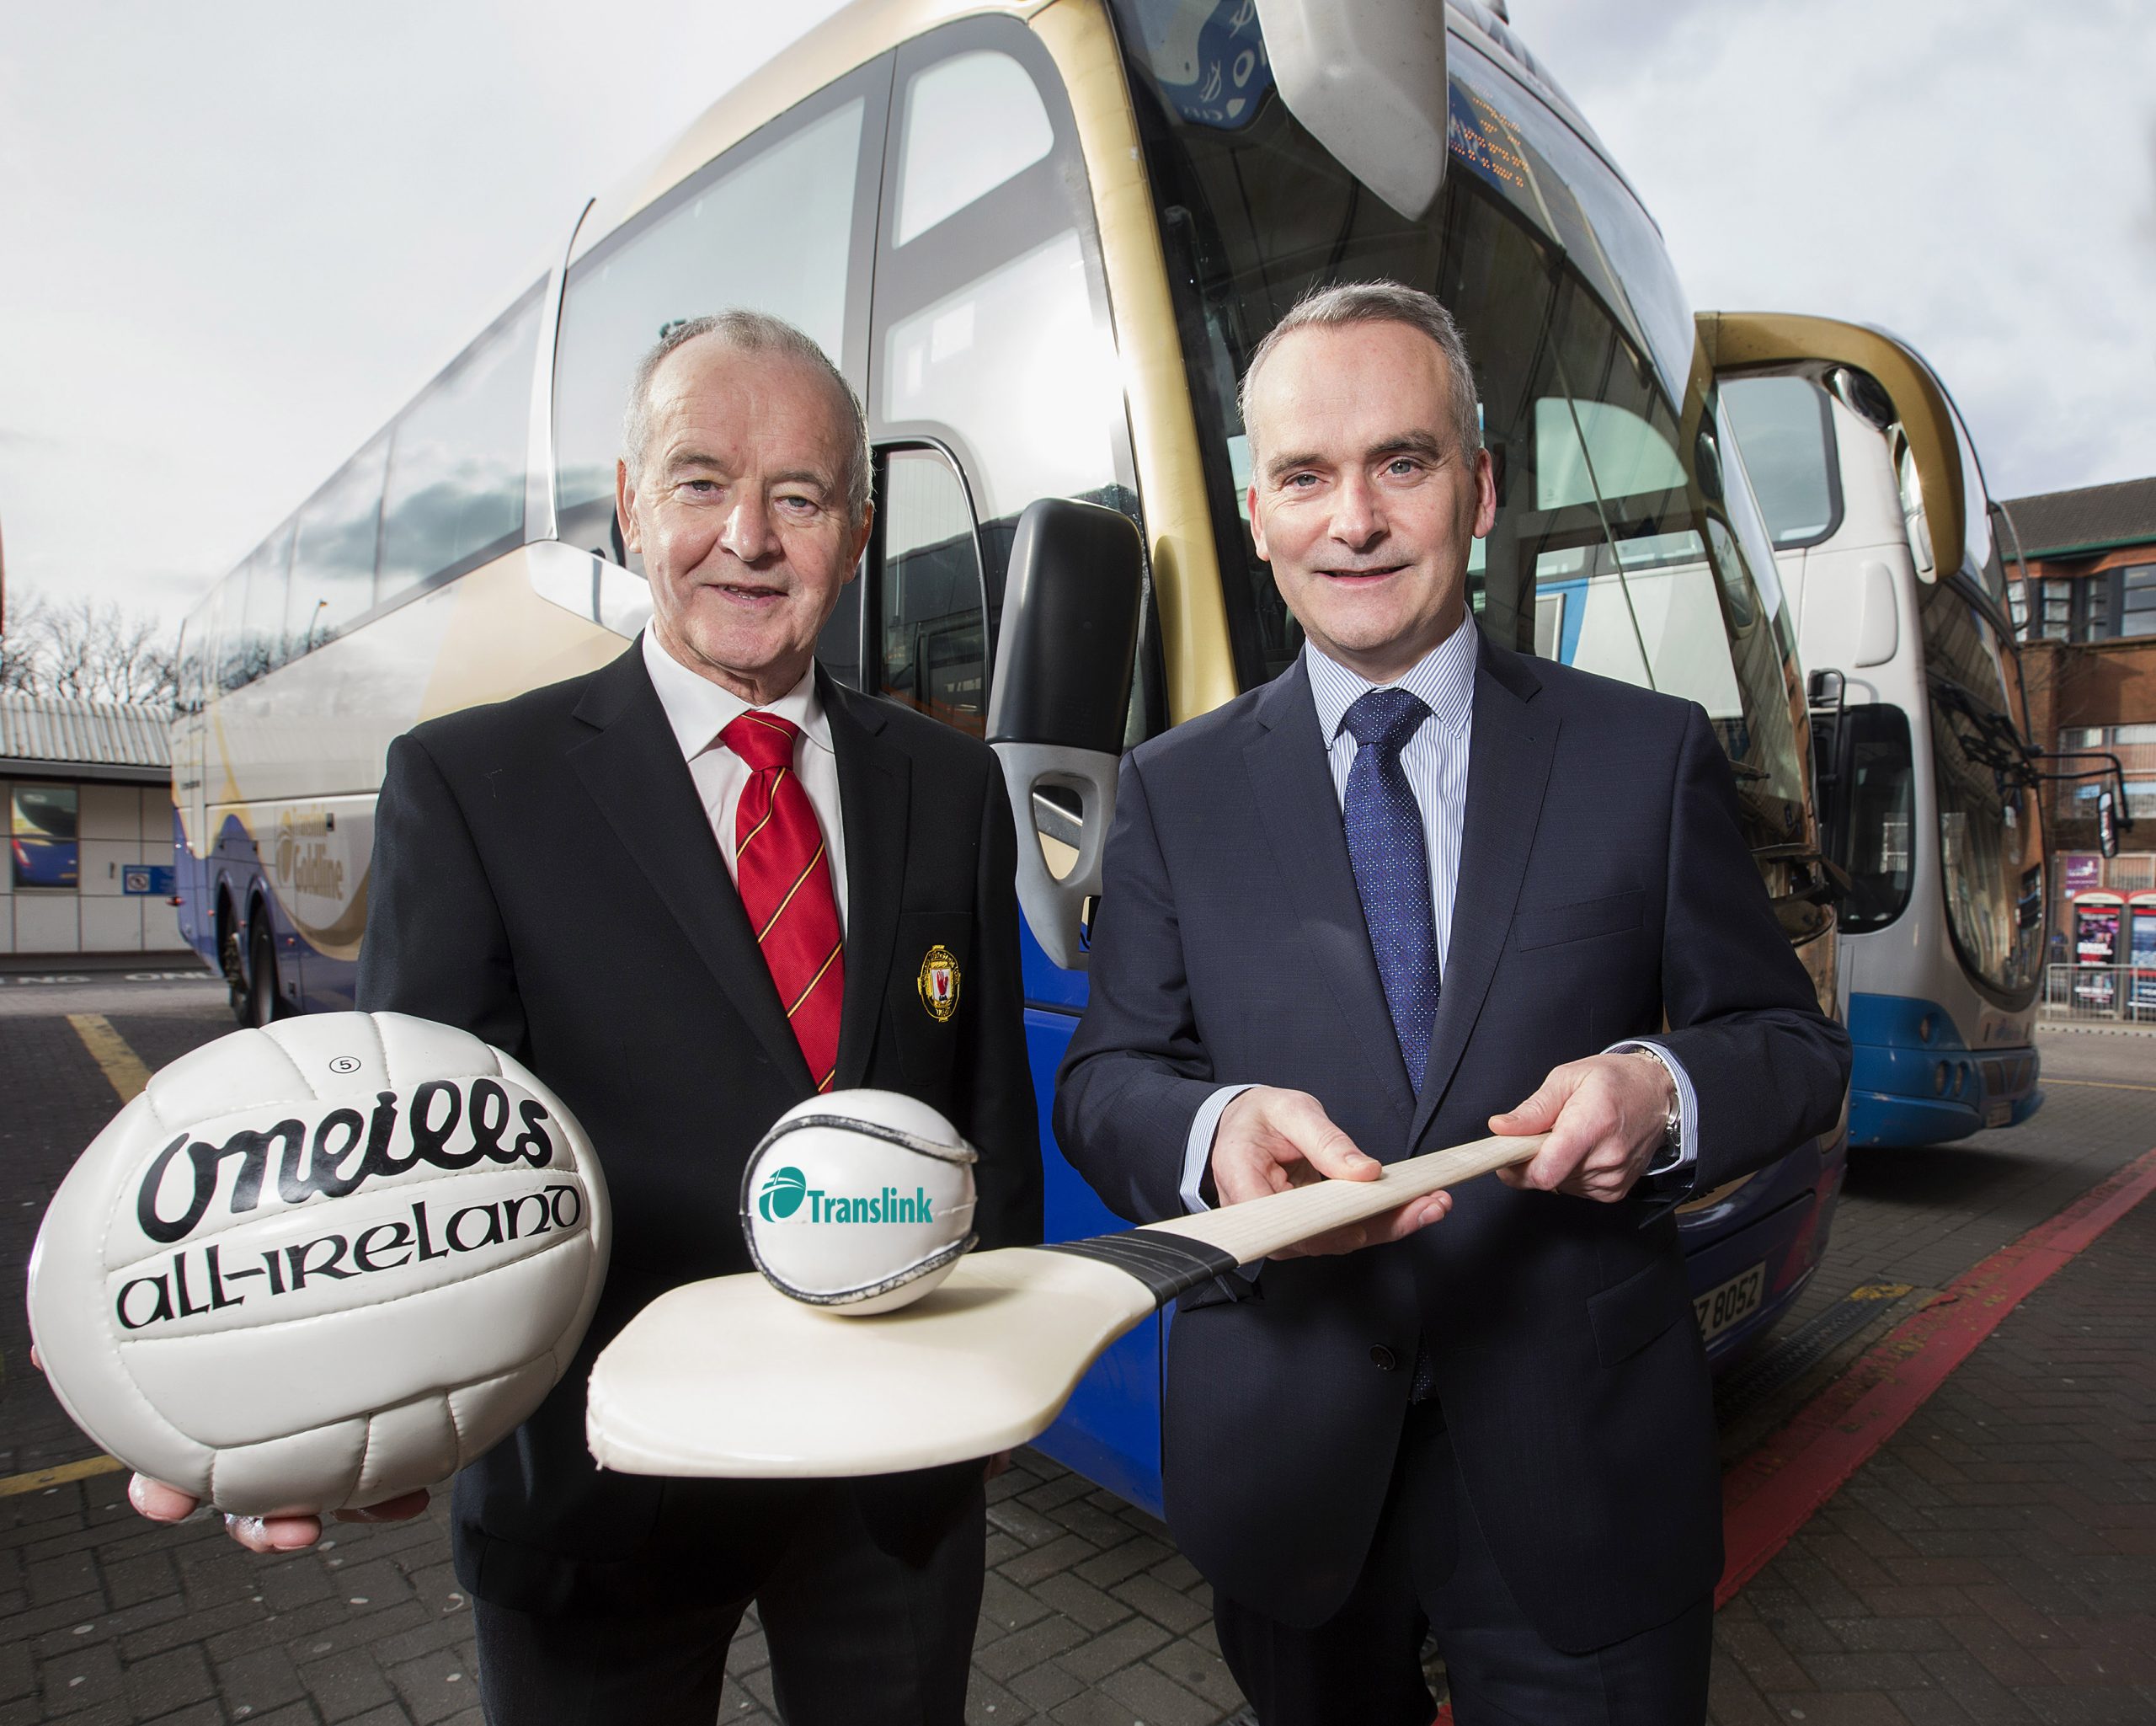 Ulster GAA pleased to announce Translink as a Corporate Partner